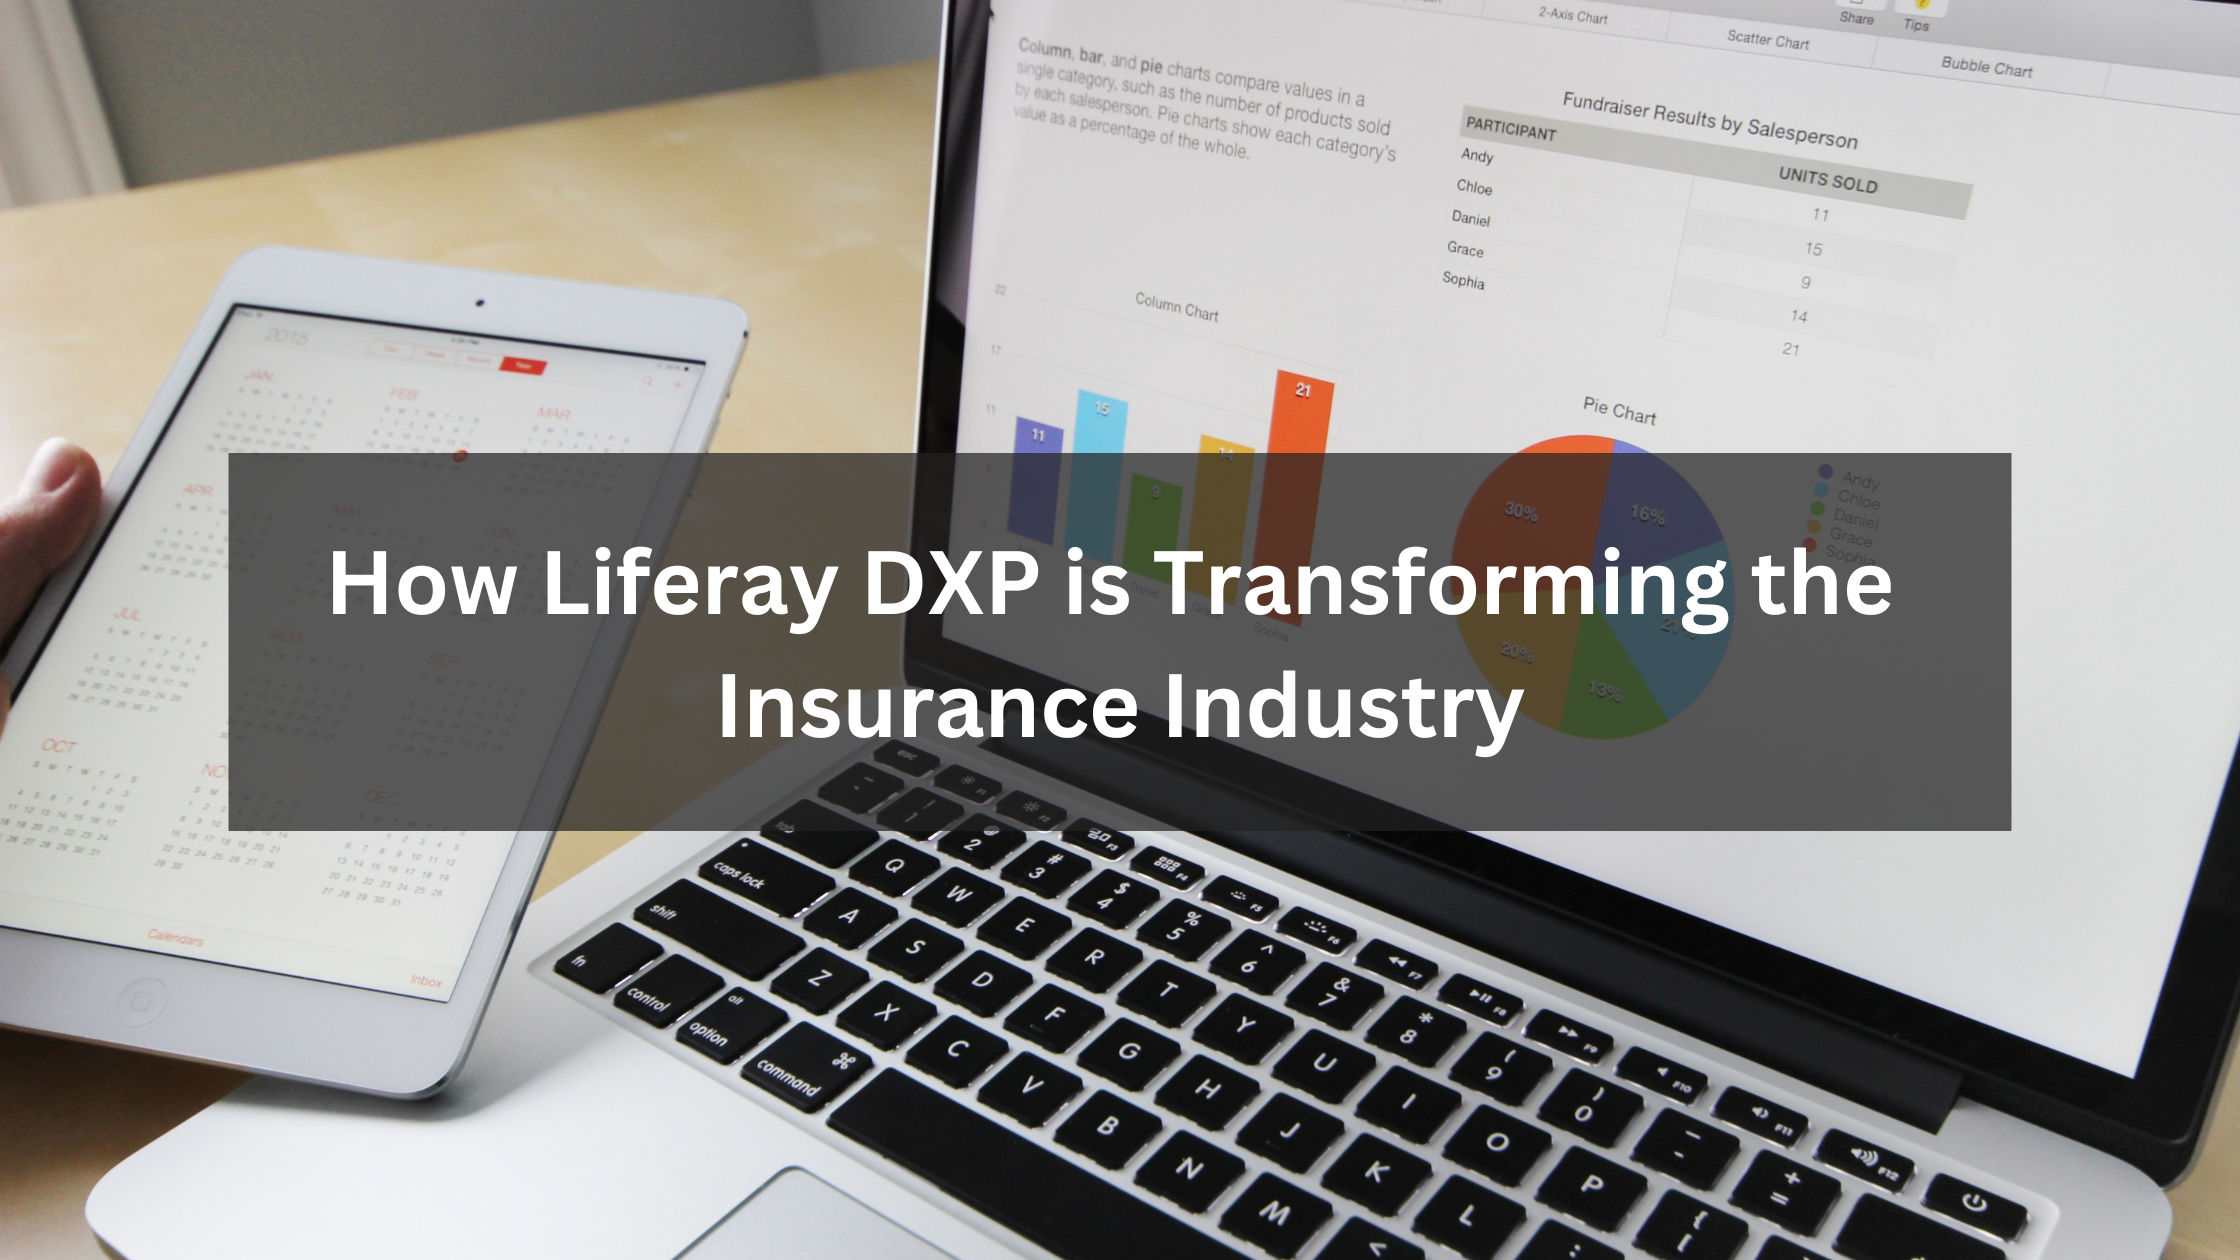 #How Liferay DXP is Transforming the Insurance Industry